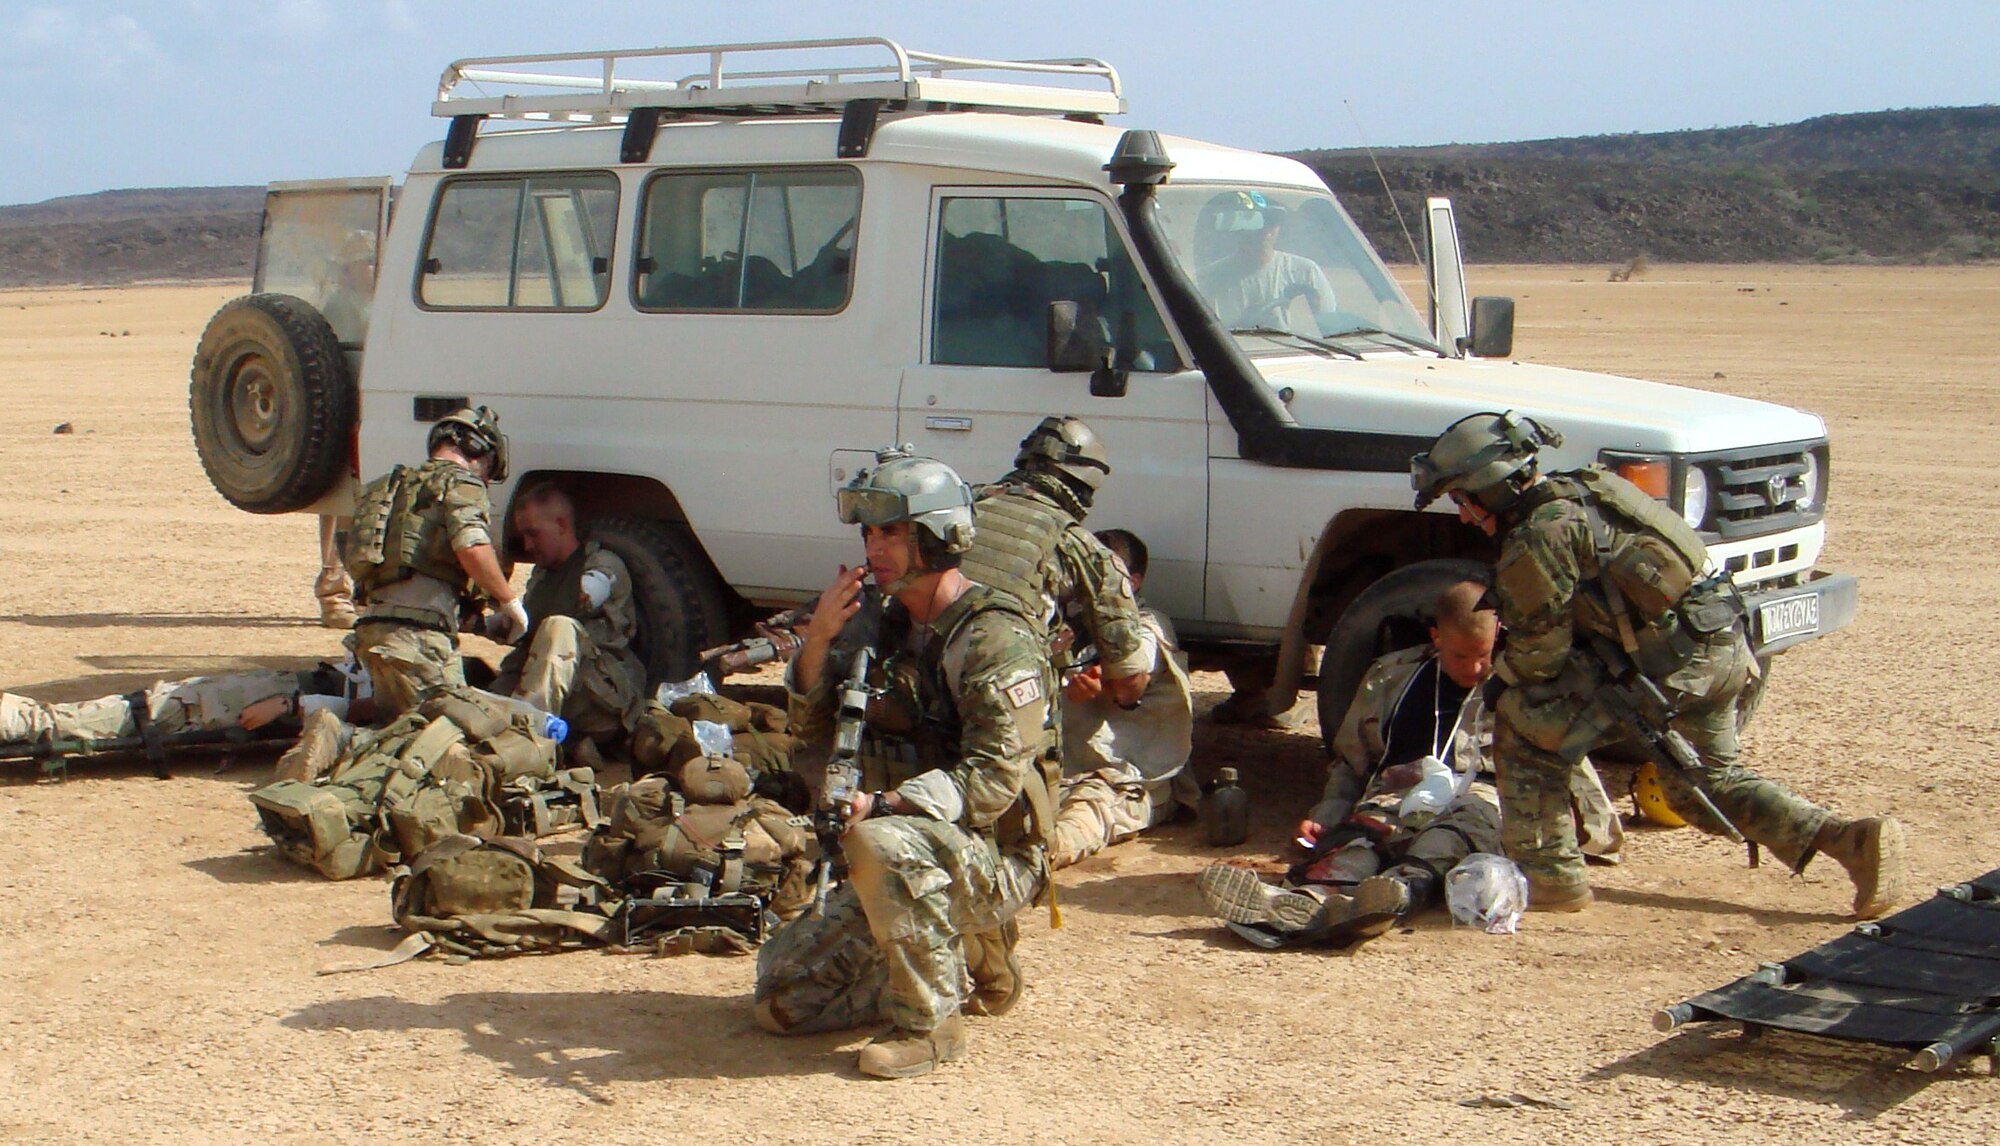 Master Sgt. Rich Carroll, a pararescueman from the 31st Rescue Squadron, organizes his team's casualty collection point during a mass casualty training exercise. Sergeant Carroll led a four-man Guardian Angel team to the scene of the incident by free fall parachute and were recovered by CH-53 helicopters. (courtesy photo)